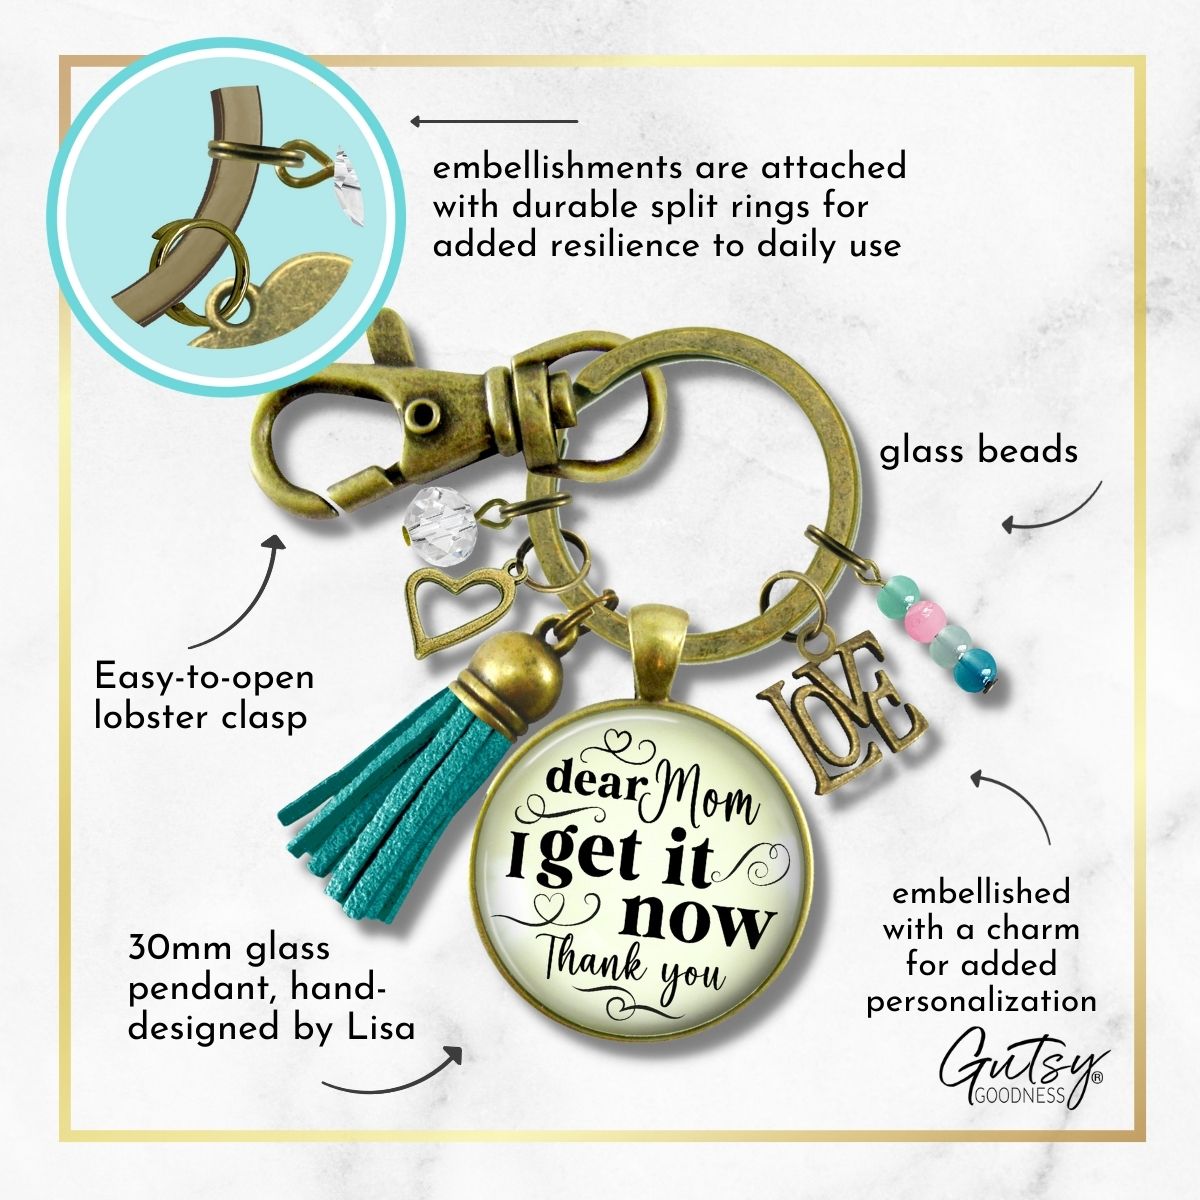 Handmade Gutsy Goodness Jewelry Dear Mom I Get It Now Keychain Gift From Adult Daughter Loving Boho Jewelry Tassel Charm & Card